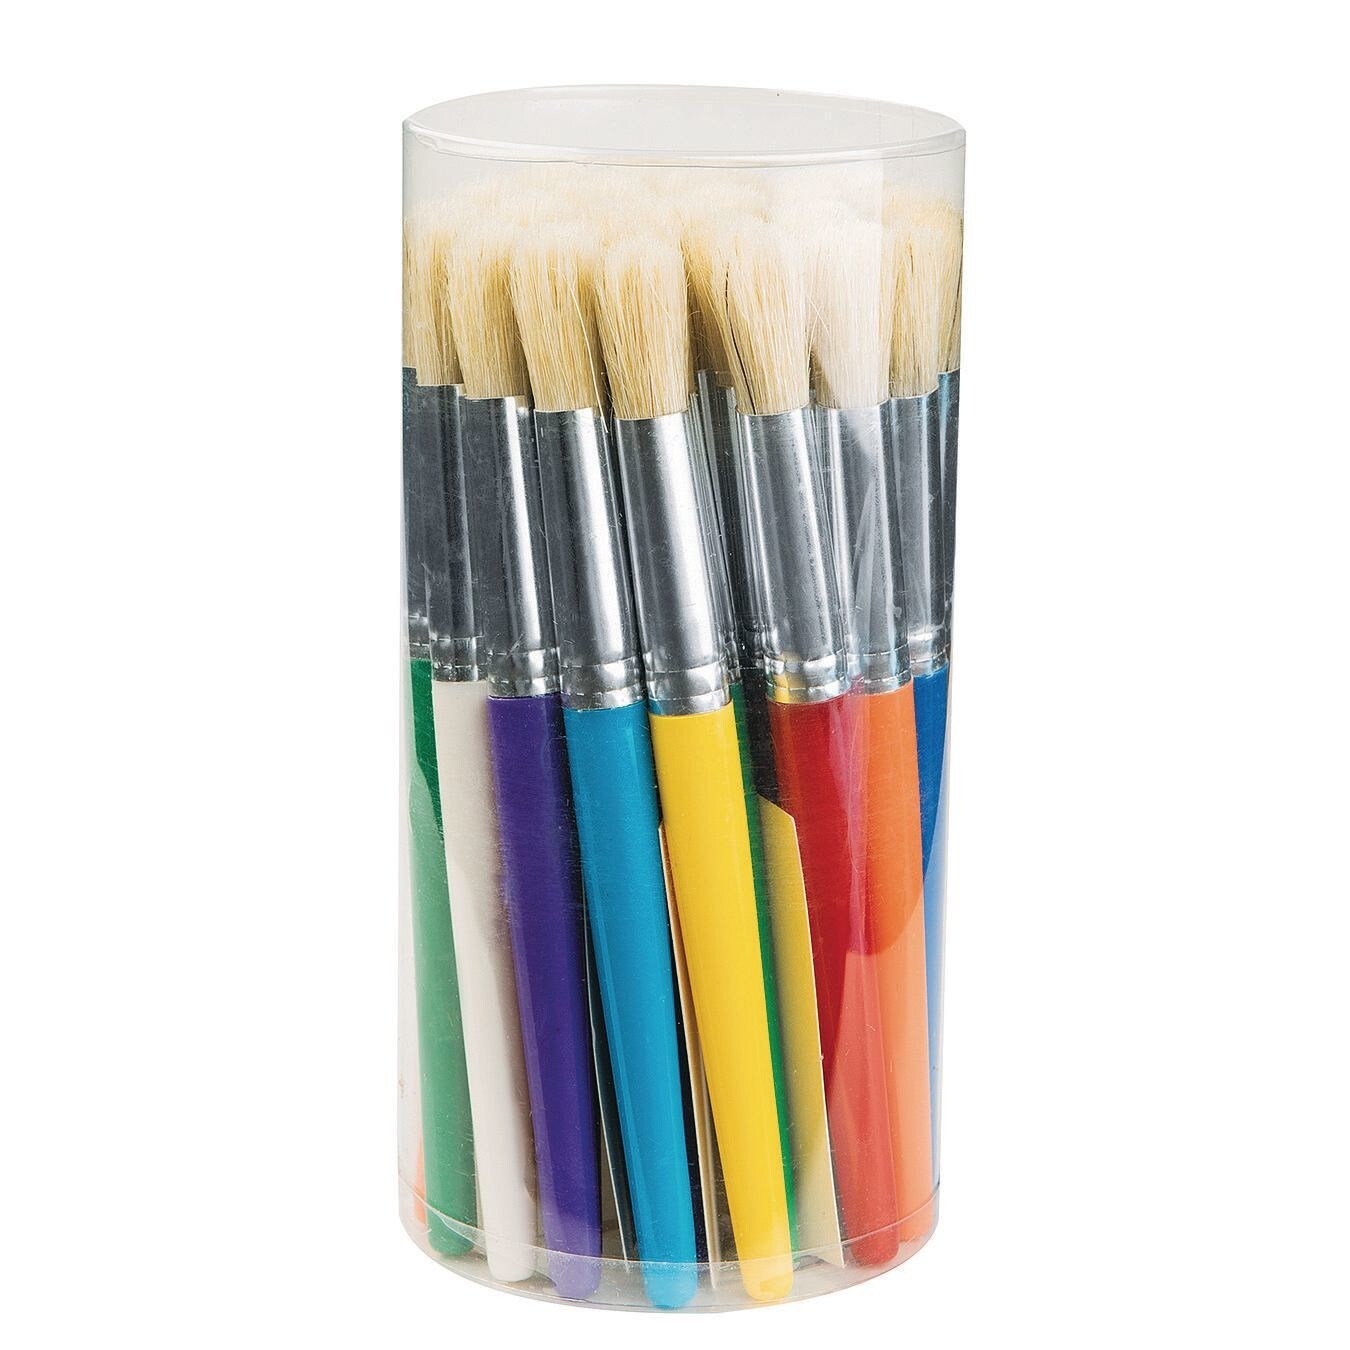 S&S Worldwide Stubby Paint Brushes, Colored Handles, Easy to Hold